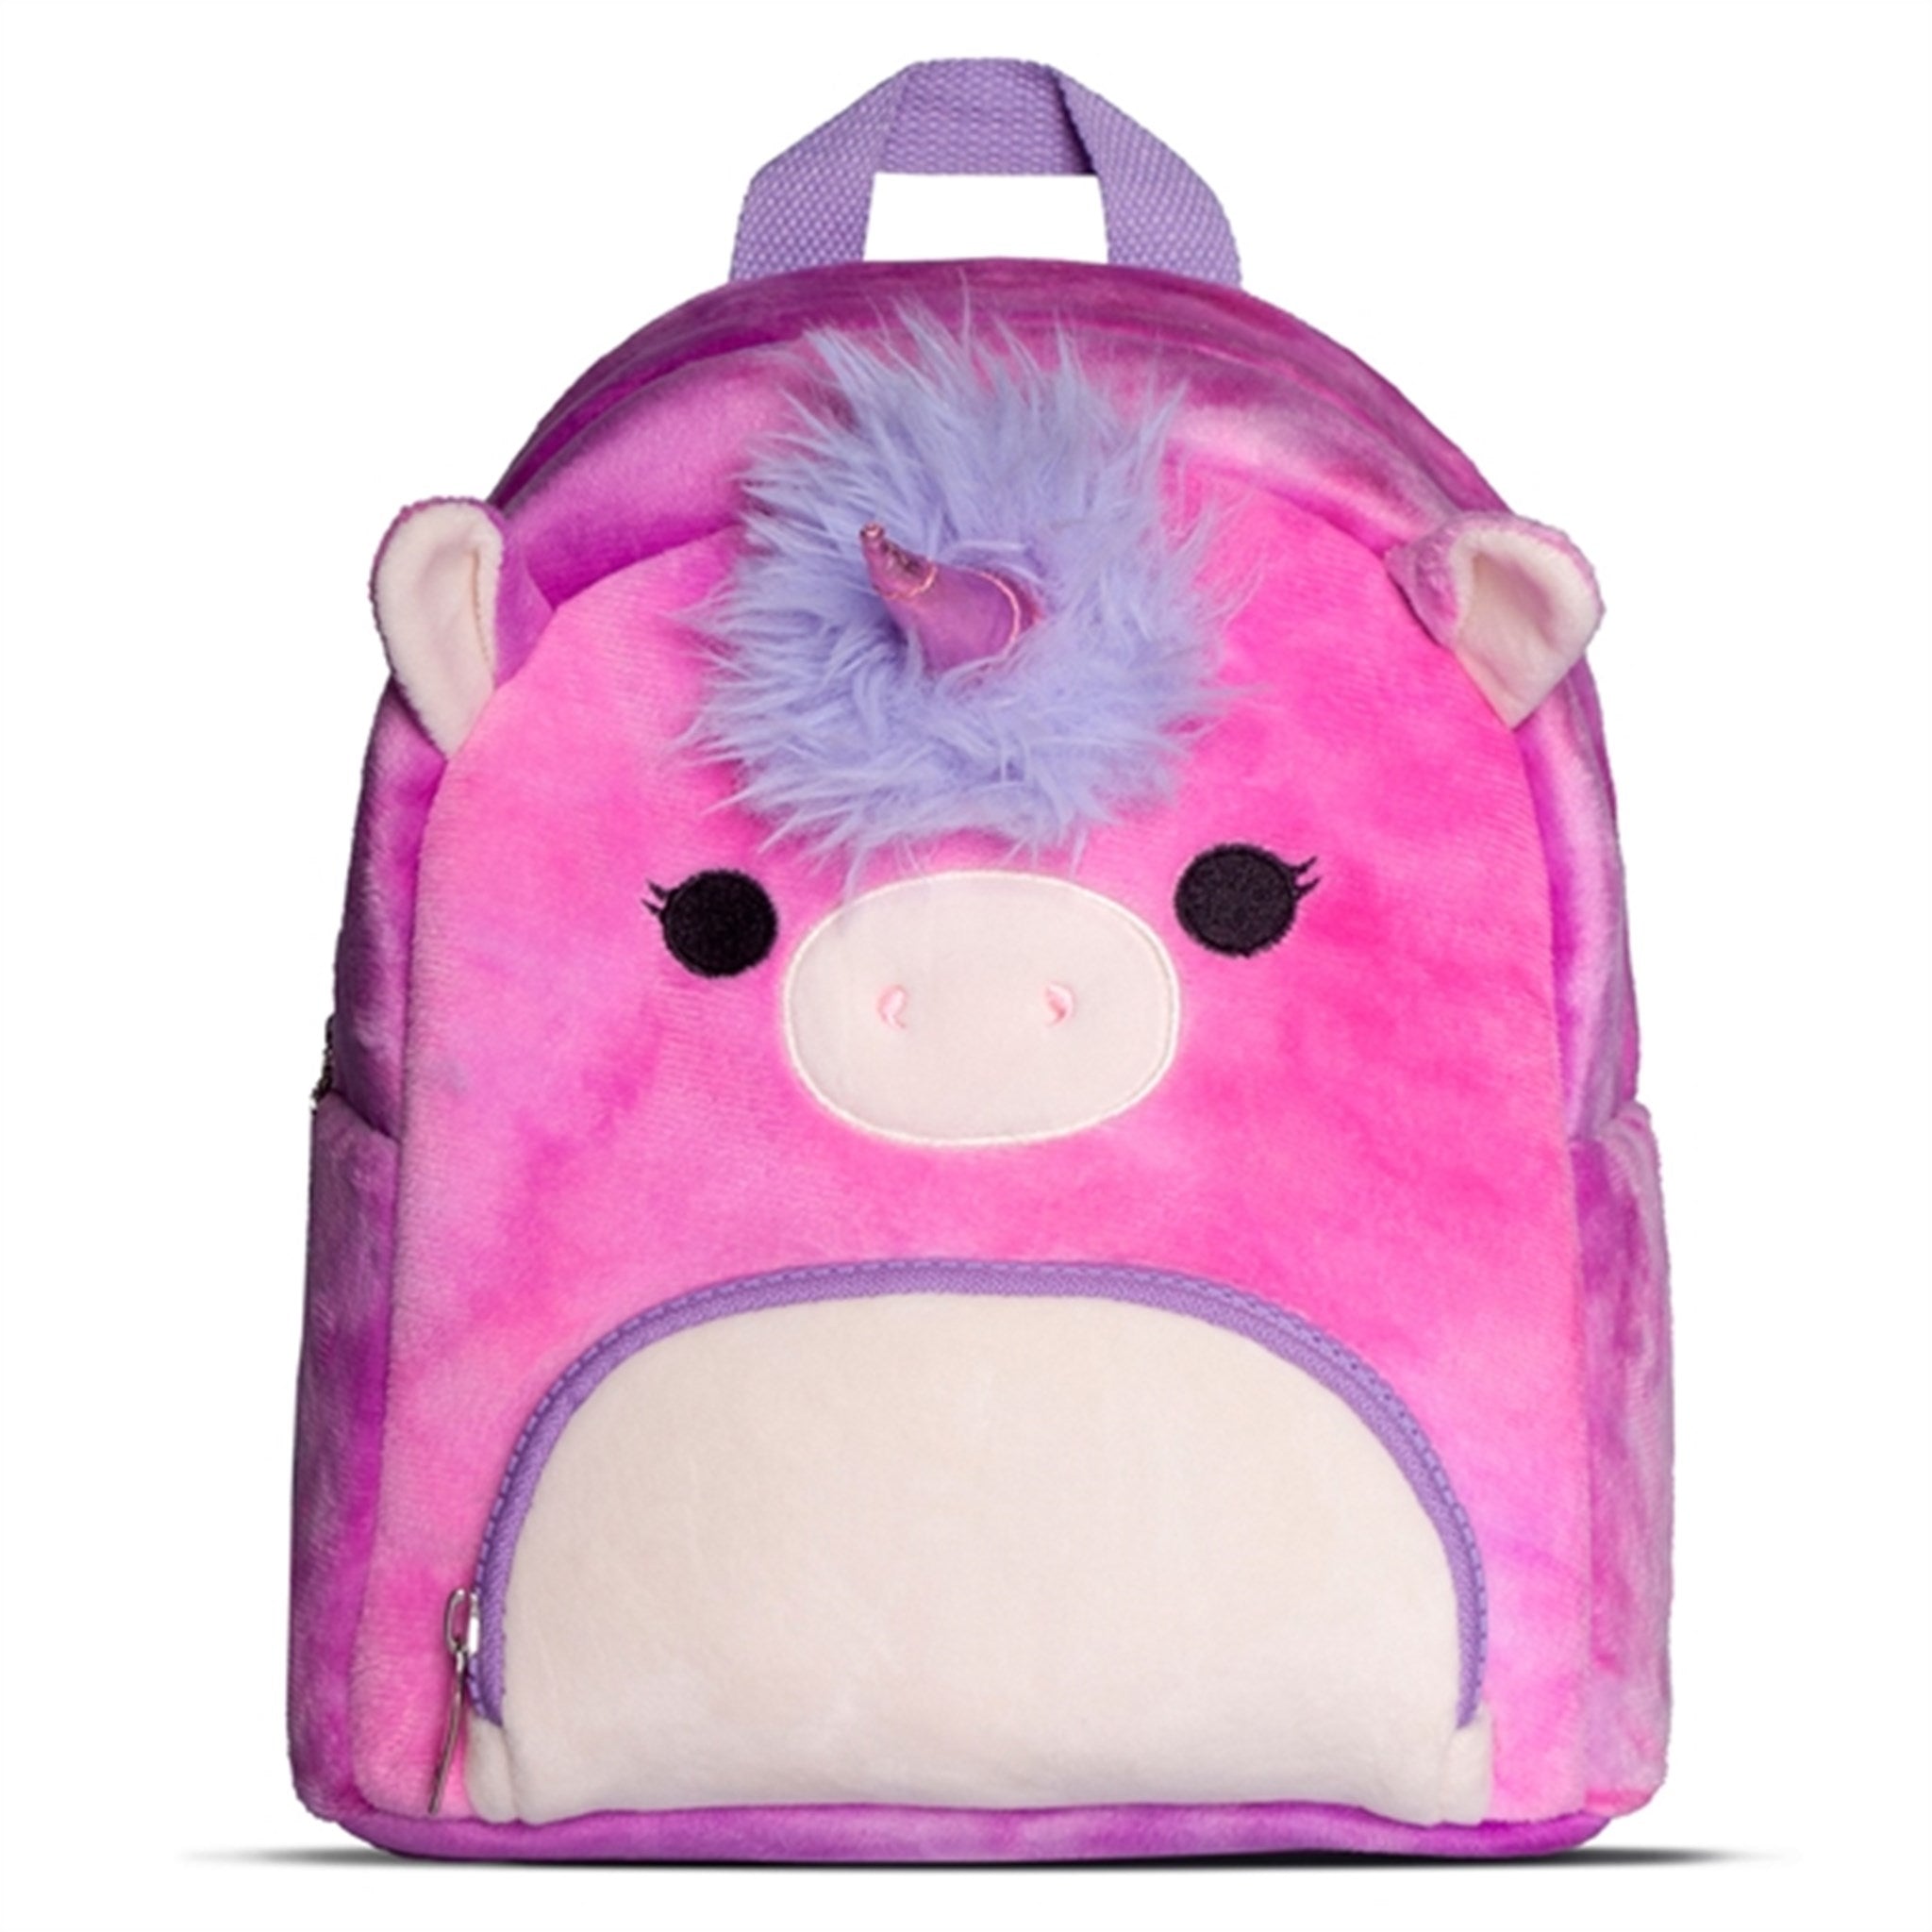 Squishmallows Backpack Lola